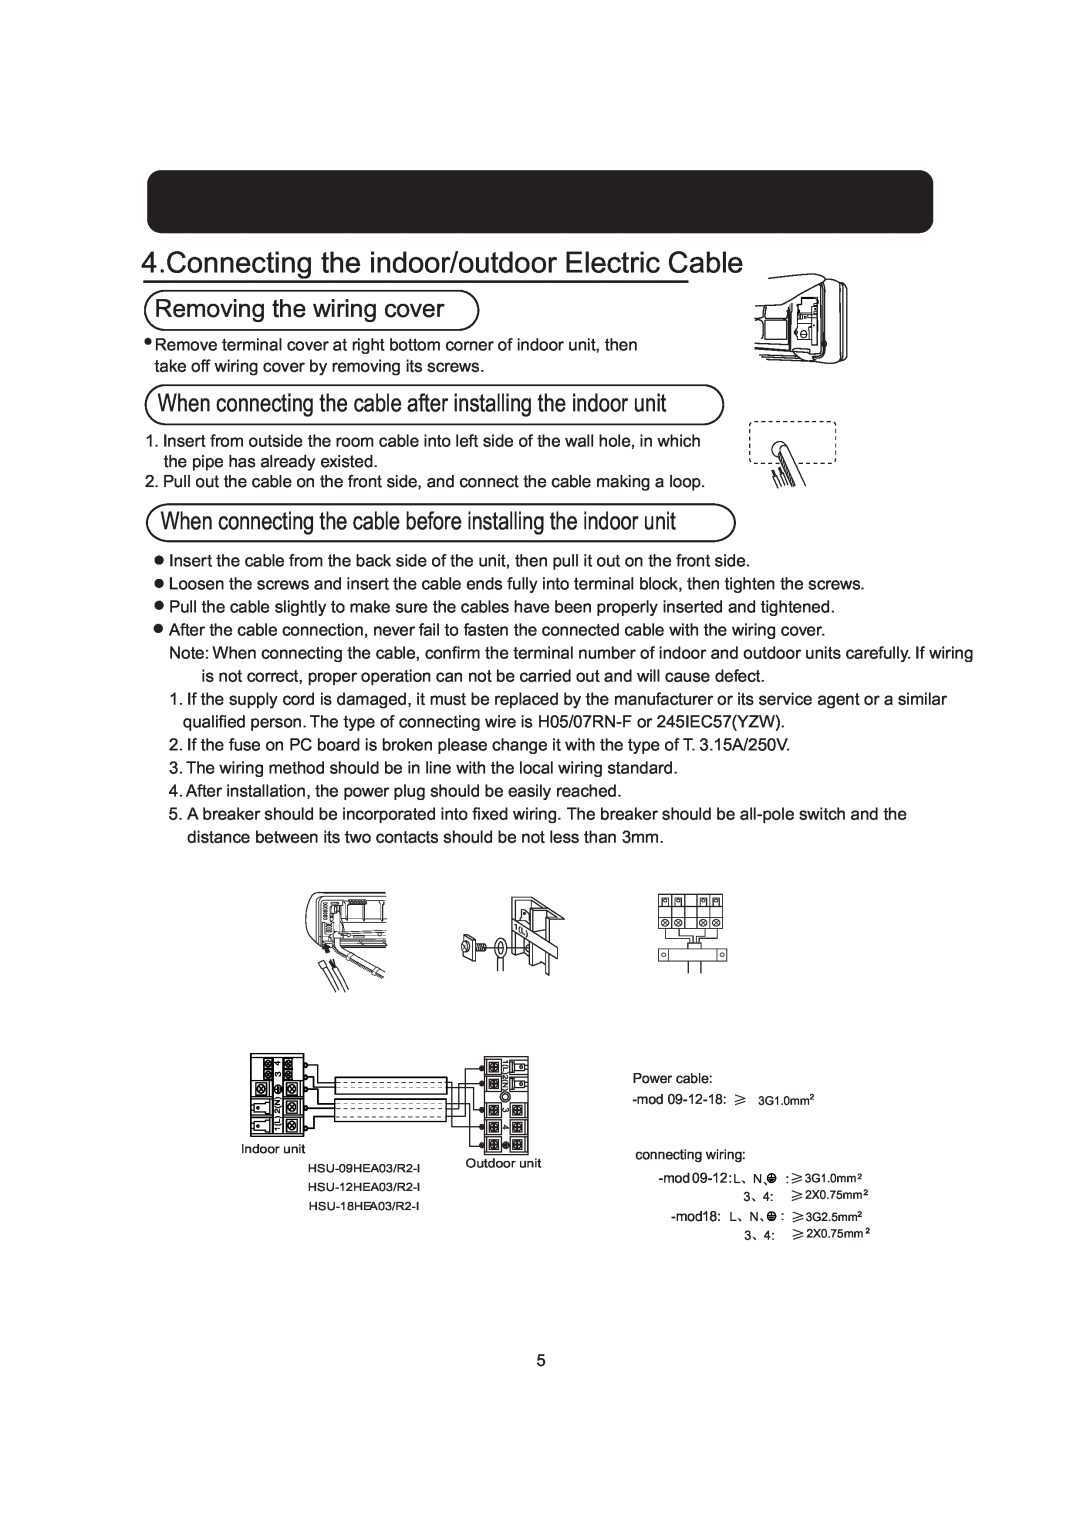 Haier HSU-09HEA03/R2-I, HSU-12HEA03/R2-I, HSU-18HEA03/R2-I installation manual Connecting the indoor/outdoor Electric Cable 